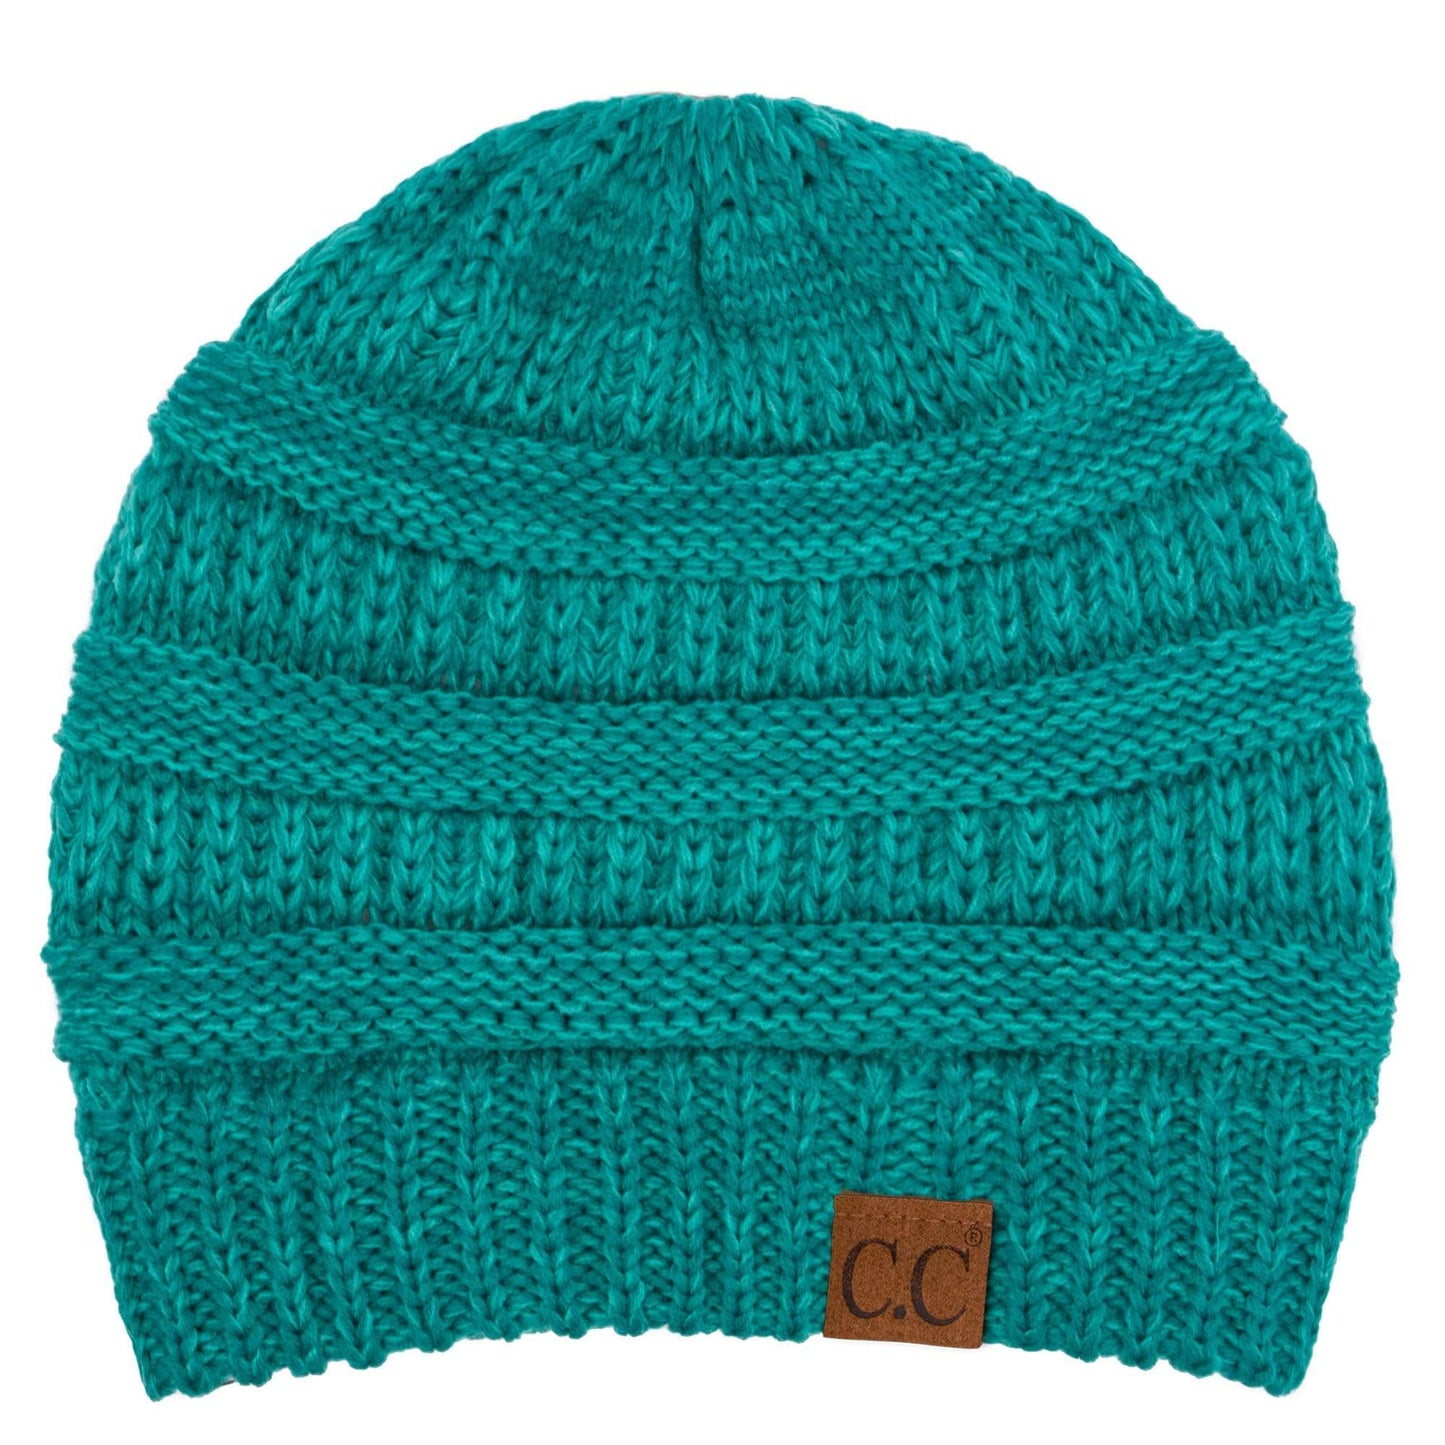 Keebon International Apparel Two Tone Mint C.C Trendy Warm Chunky Soft Stretch Two-Toned Cable Knit Beanie Skully